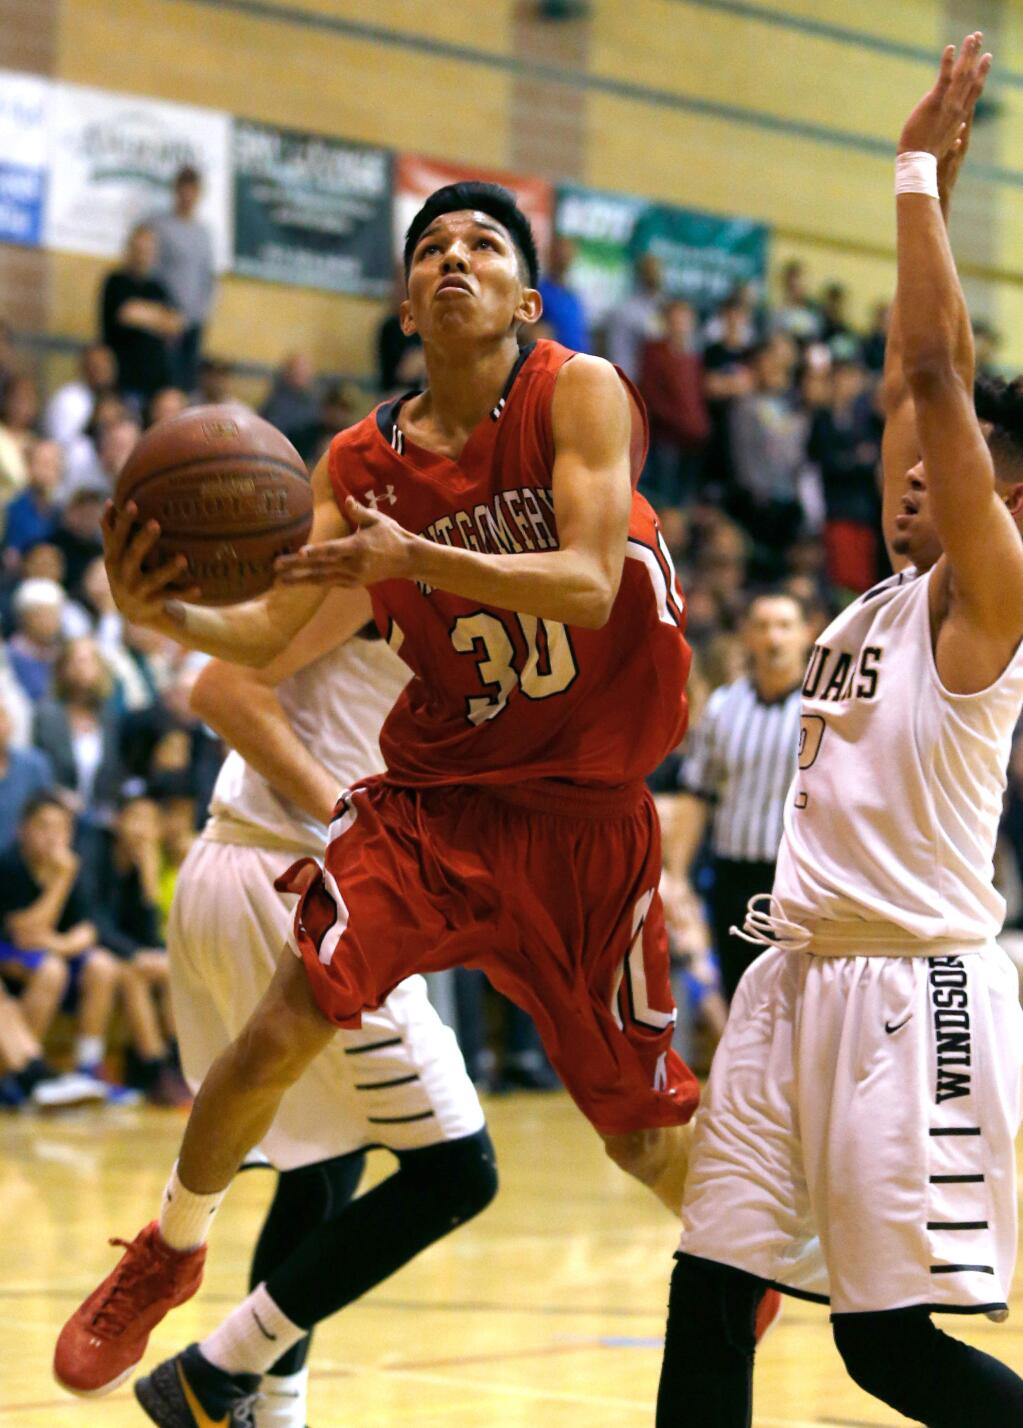 Montgomery's Alex Soria (30) goes for a layup while defended by Windsor's Chaise Noles (2), right, during the first half of the NCS Division 2 boys basketball quarterfinal game between Montgomery and Windsor high schools in Windsor, California, on Friday, February 26, 2016. (Alvin Jornada / The Press Democrat)